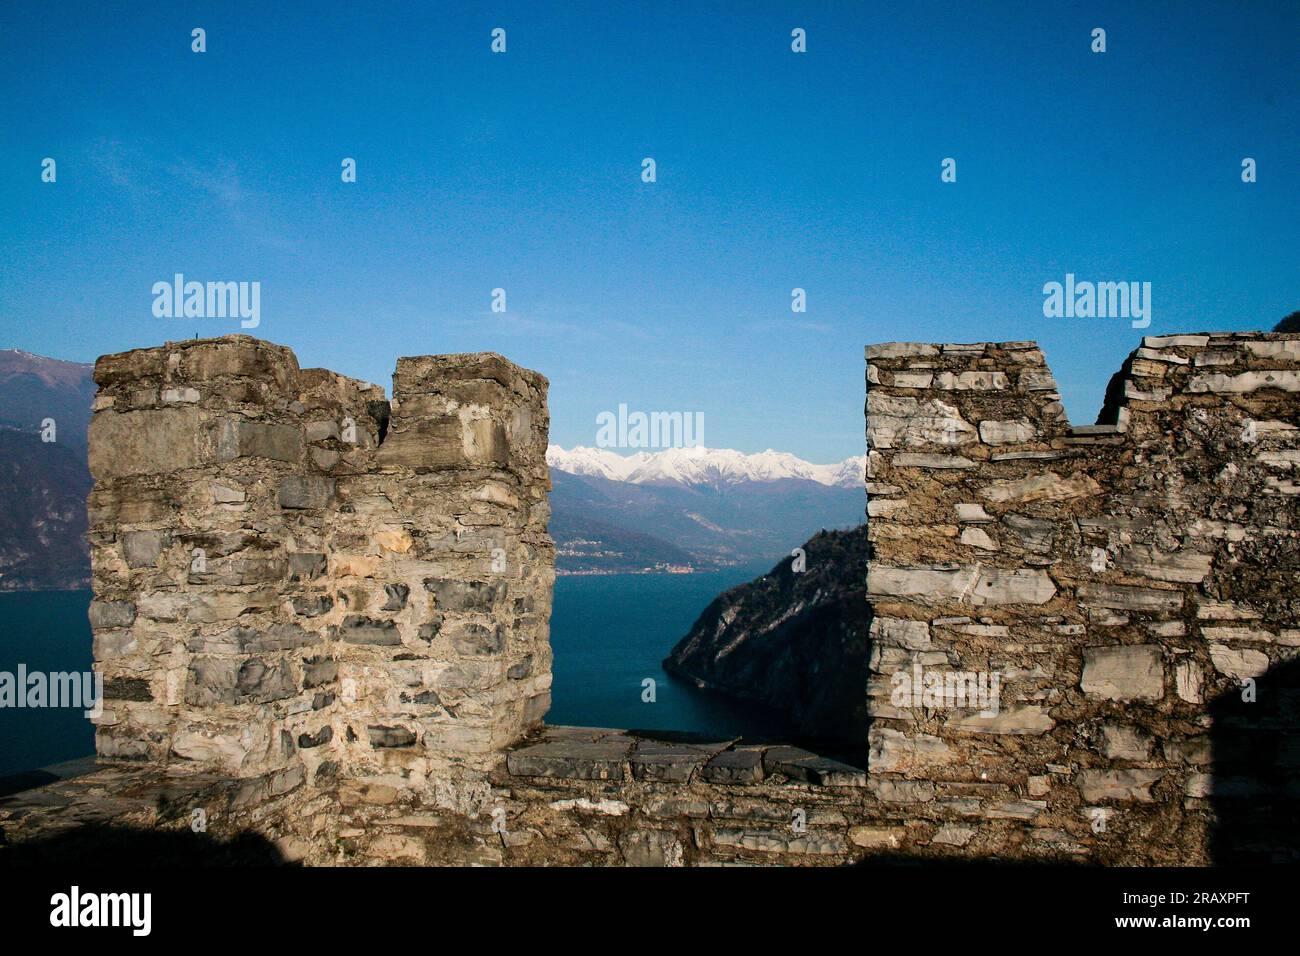 Perledo, Province of Lecco, region Lombardy, eastern shore of Lake of Como, Italy. Castello di Vezio. The castle, dating back to the 11th century AD, overlooks and dominates the eastern shore of Lake Como. Inside the building there is also a falconry. The castle walls, view of mountains and lake. Stock Photo